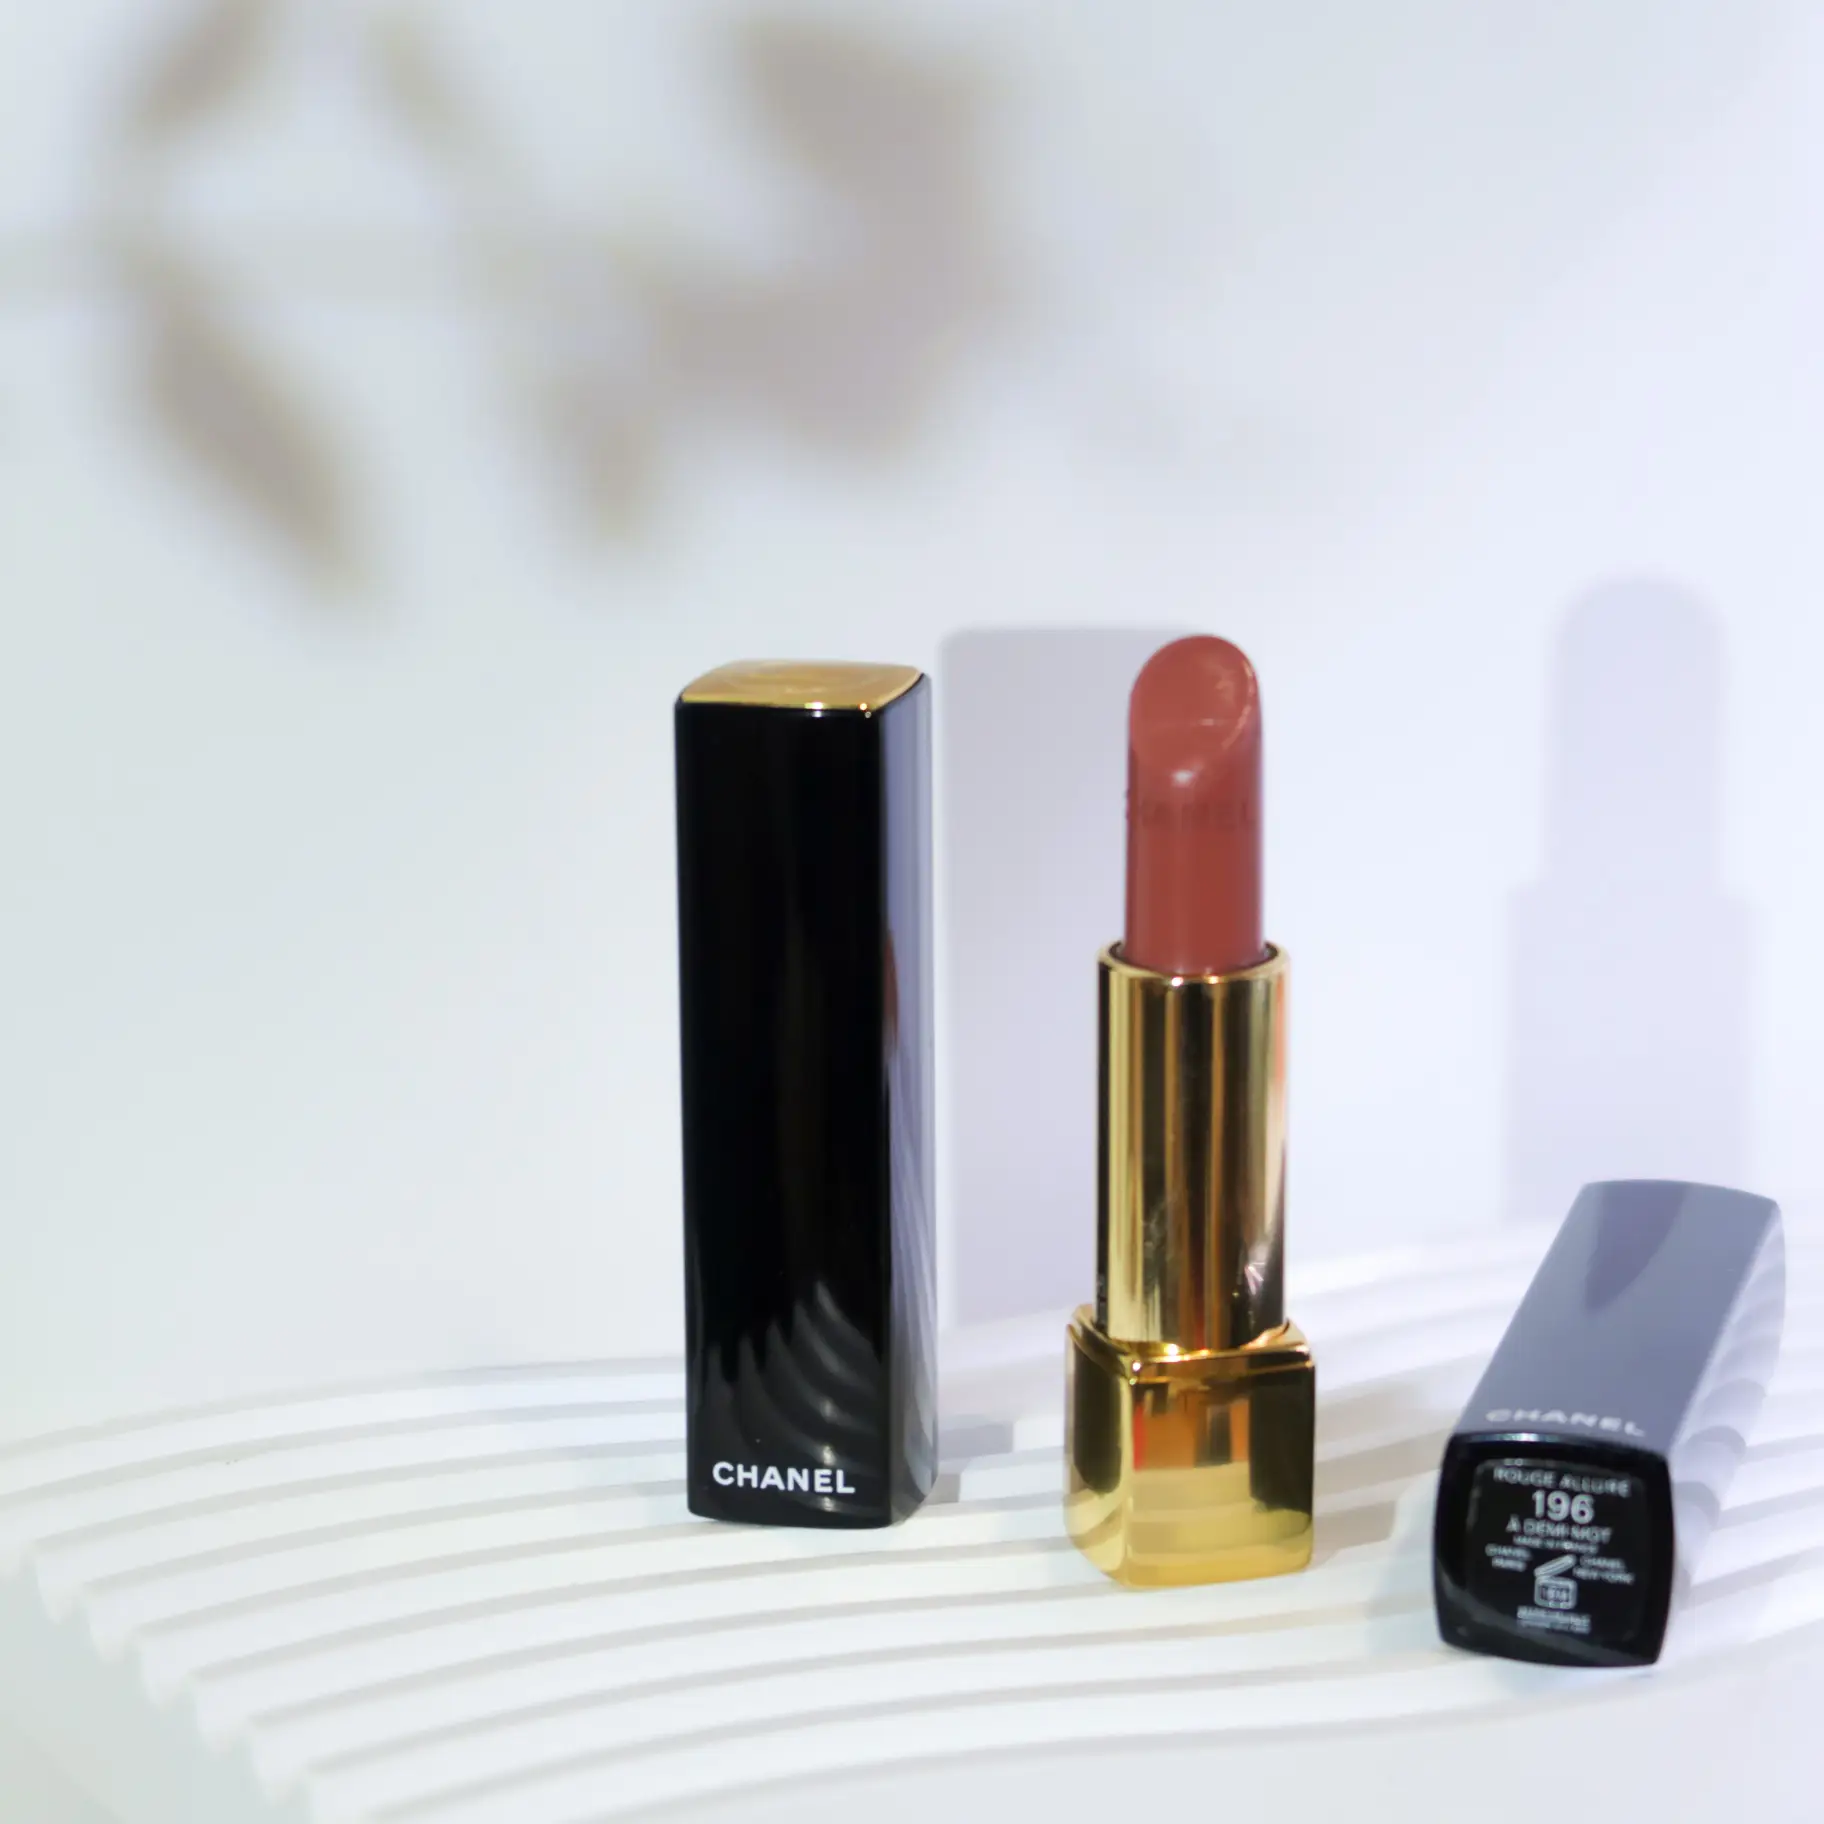 Chanel Lipstick Collection 👄, Gallery posted by Emma Clover ✨